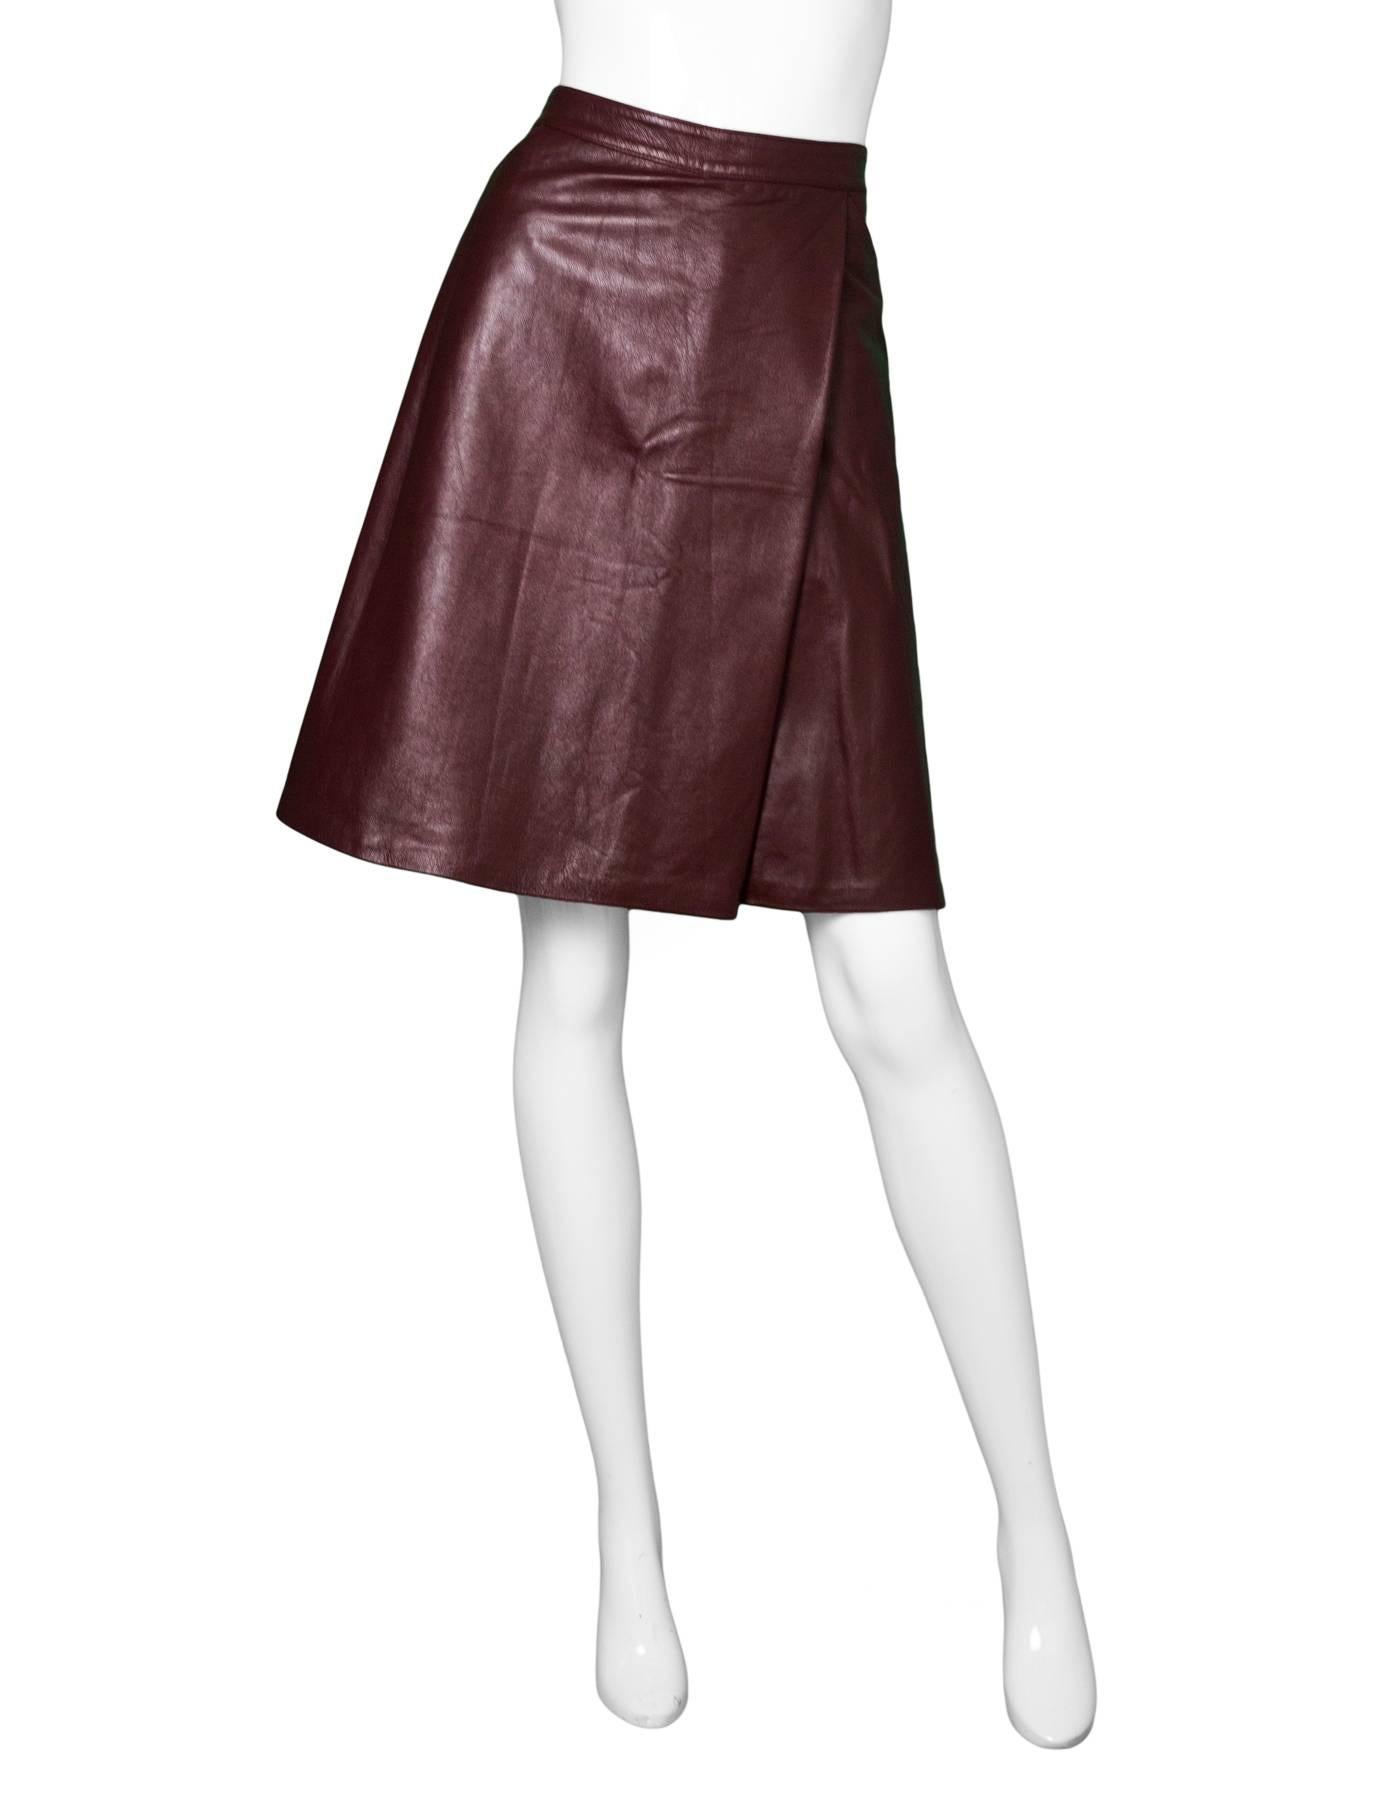 Luca Luca Burgundy Leather Skirt Sz 10

Features faux wrap-style

Made in: Italy
Color: Burgundy
Composition: 100% Leather
Lining: Burgundy textile
Closure/opening: Back zip closure
Exterior Pockets: Pockets at hips
Interior Pockets: None
Overall